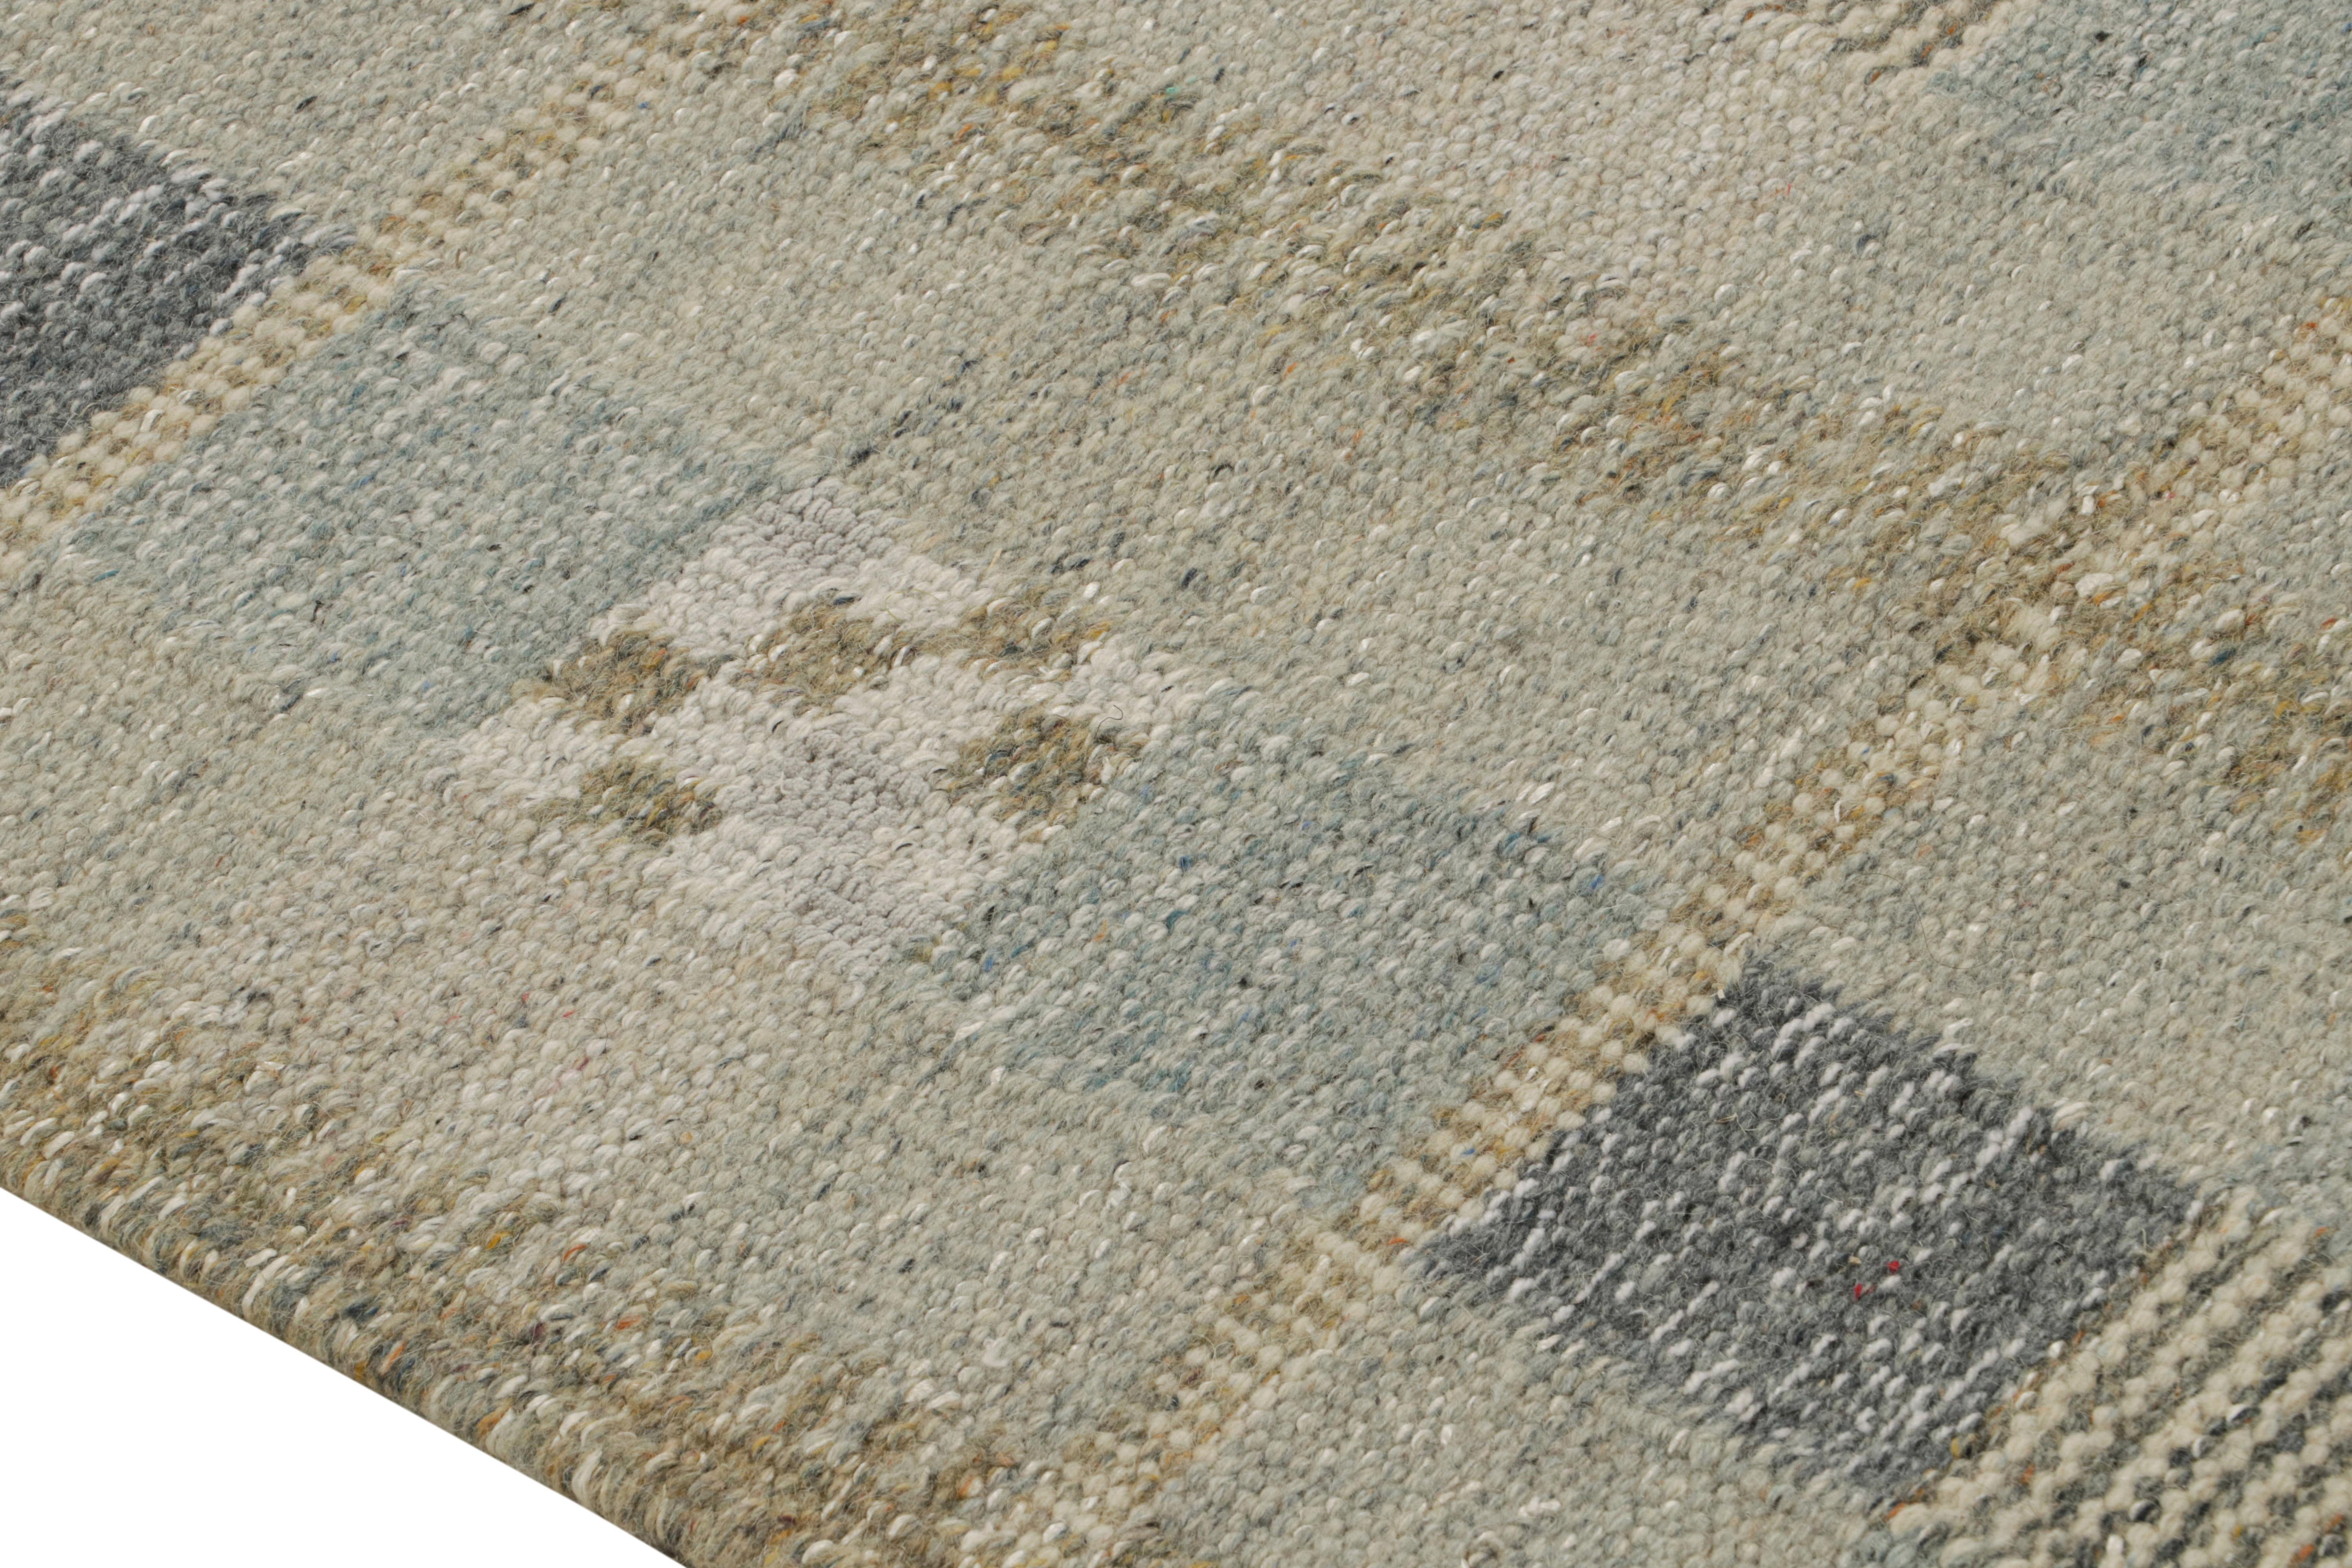 Hand-Woven Rug & Kilim’s Scandinavian Style Kilim in Blue & gray Geometric Patterns For Sale